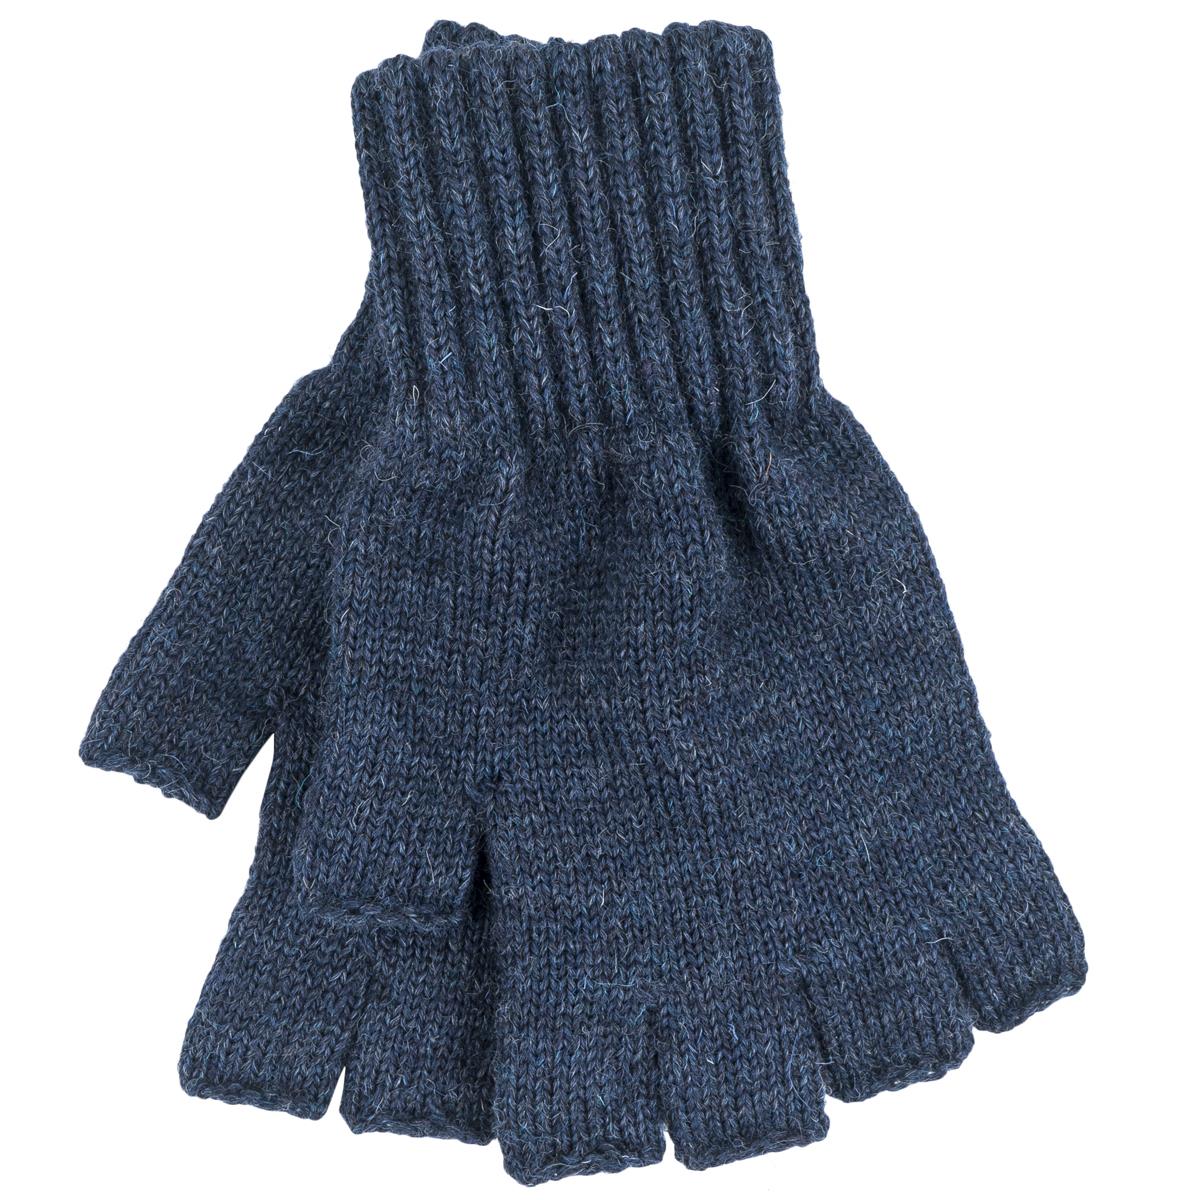 What sets apart the seven-gauge lambswool yarn in Barbour fingerless gloves?